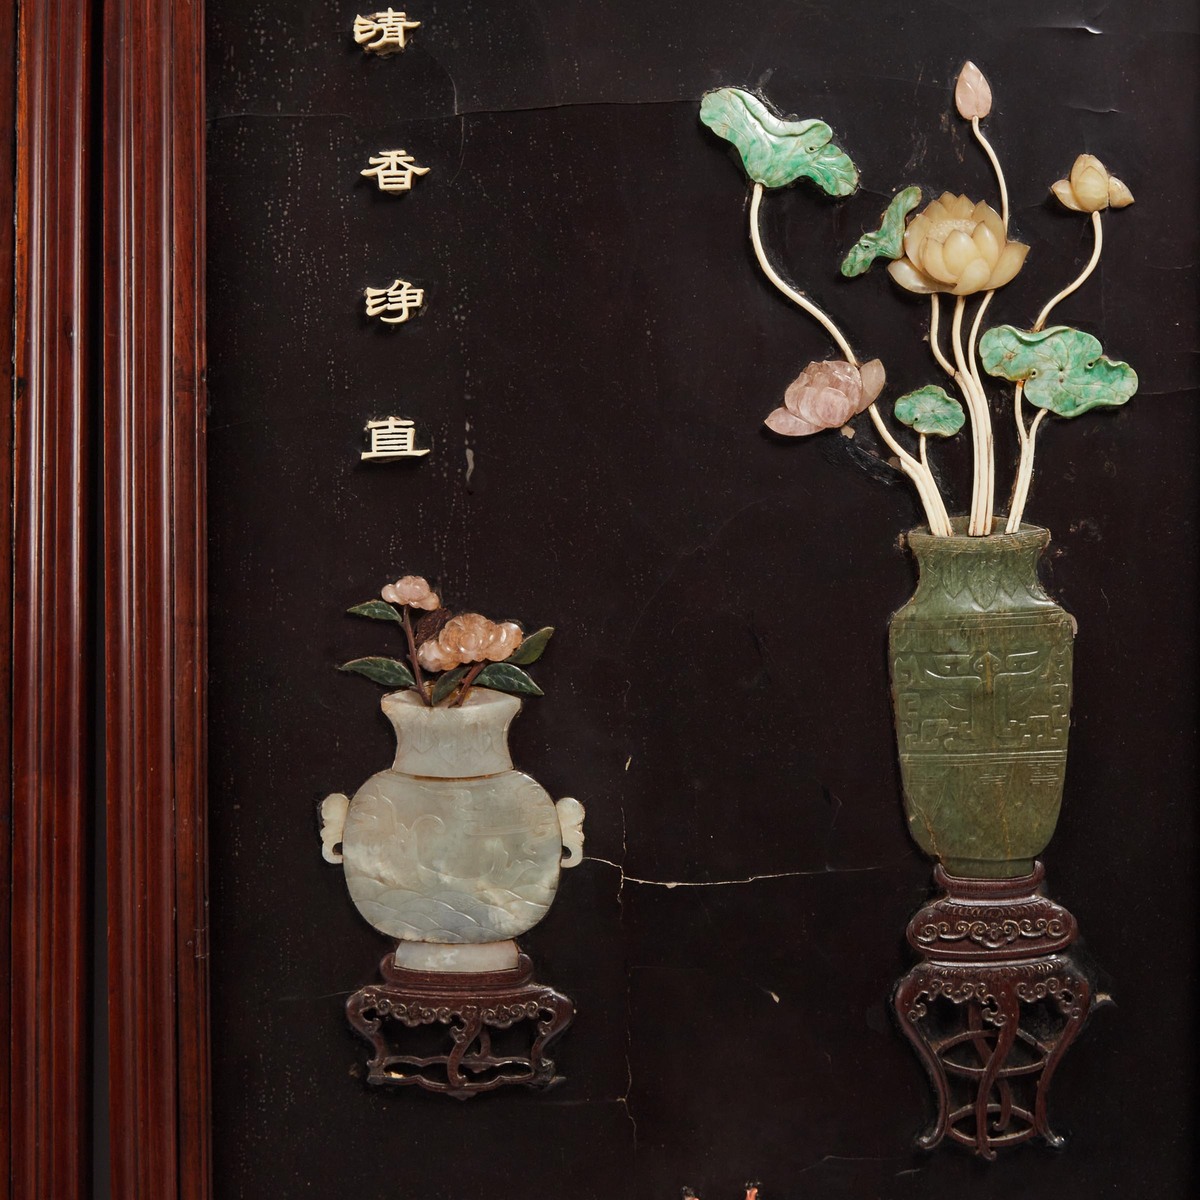 A Pair of Jade-Inlaid 'Hundred Antiques' Panels, Late Qing Dynasty, 19th Century, 清 十九世纪 黑漆嵌宝大挂屏一对, - Image 2 of 11